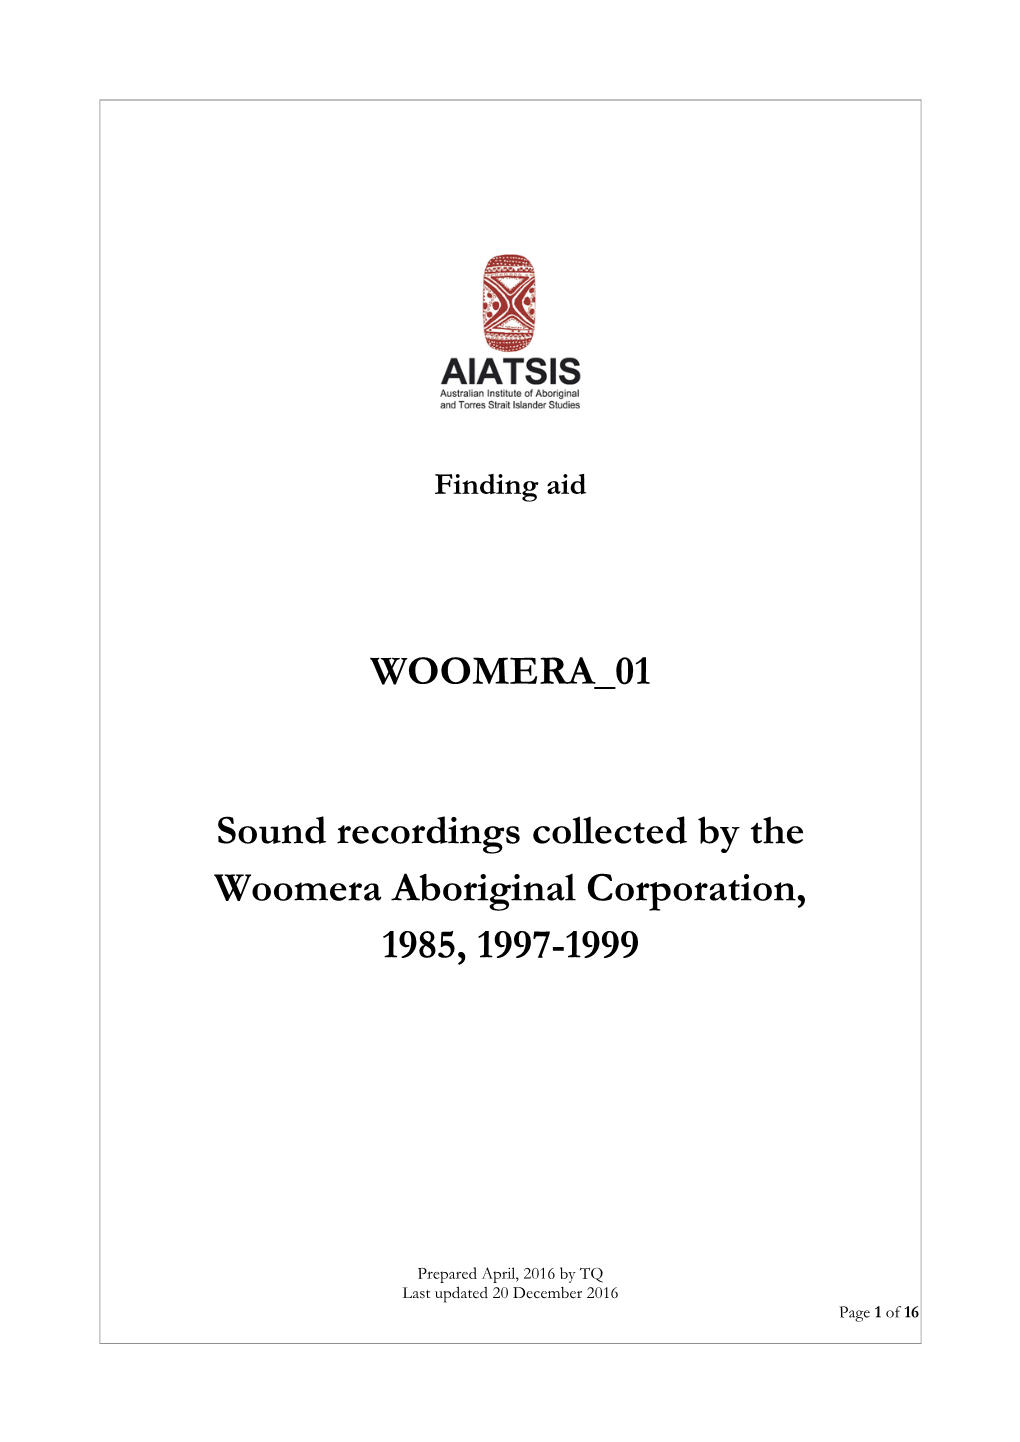 WOOMERA 01 Sound Recordings Collected by the Woomera